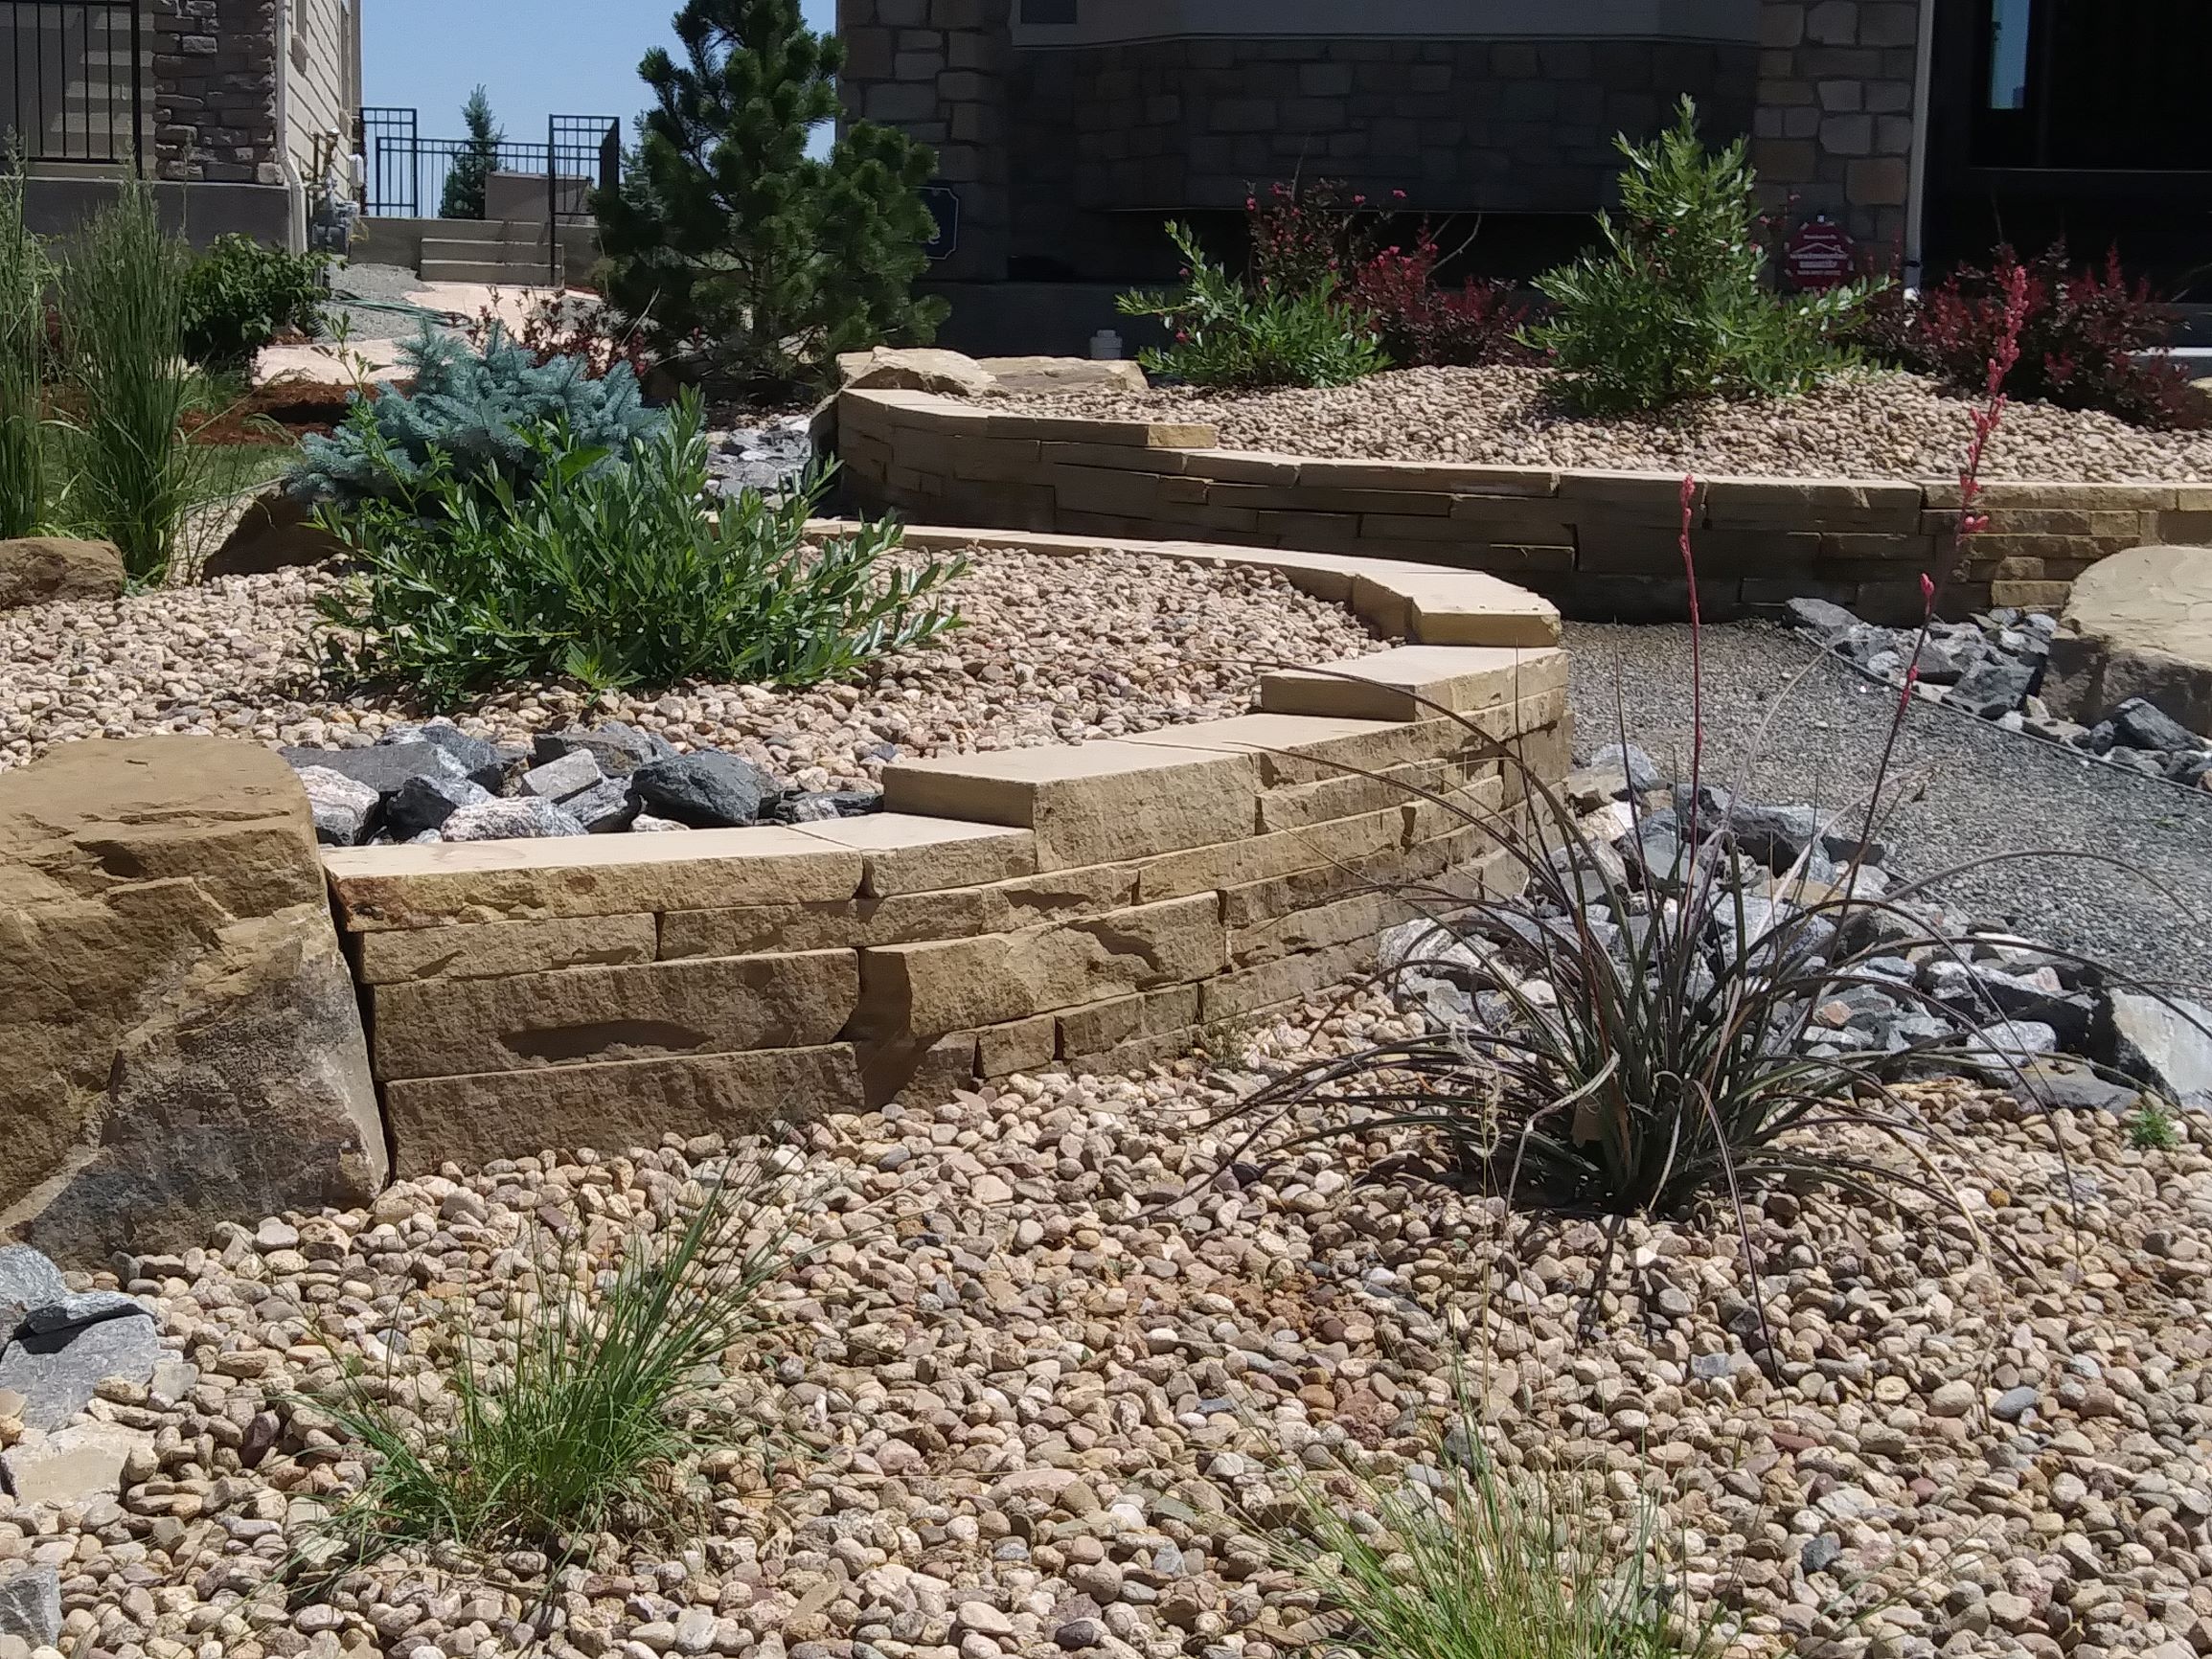 Large rocks and brick edged raised beds. Multiple bushes and plants through out.